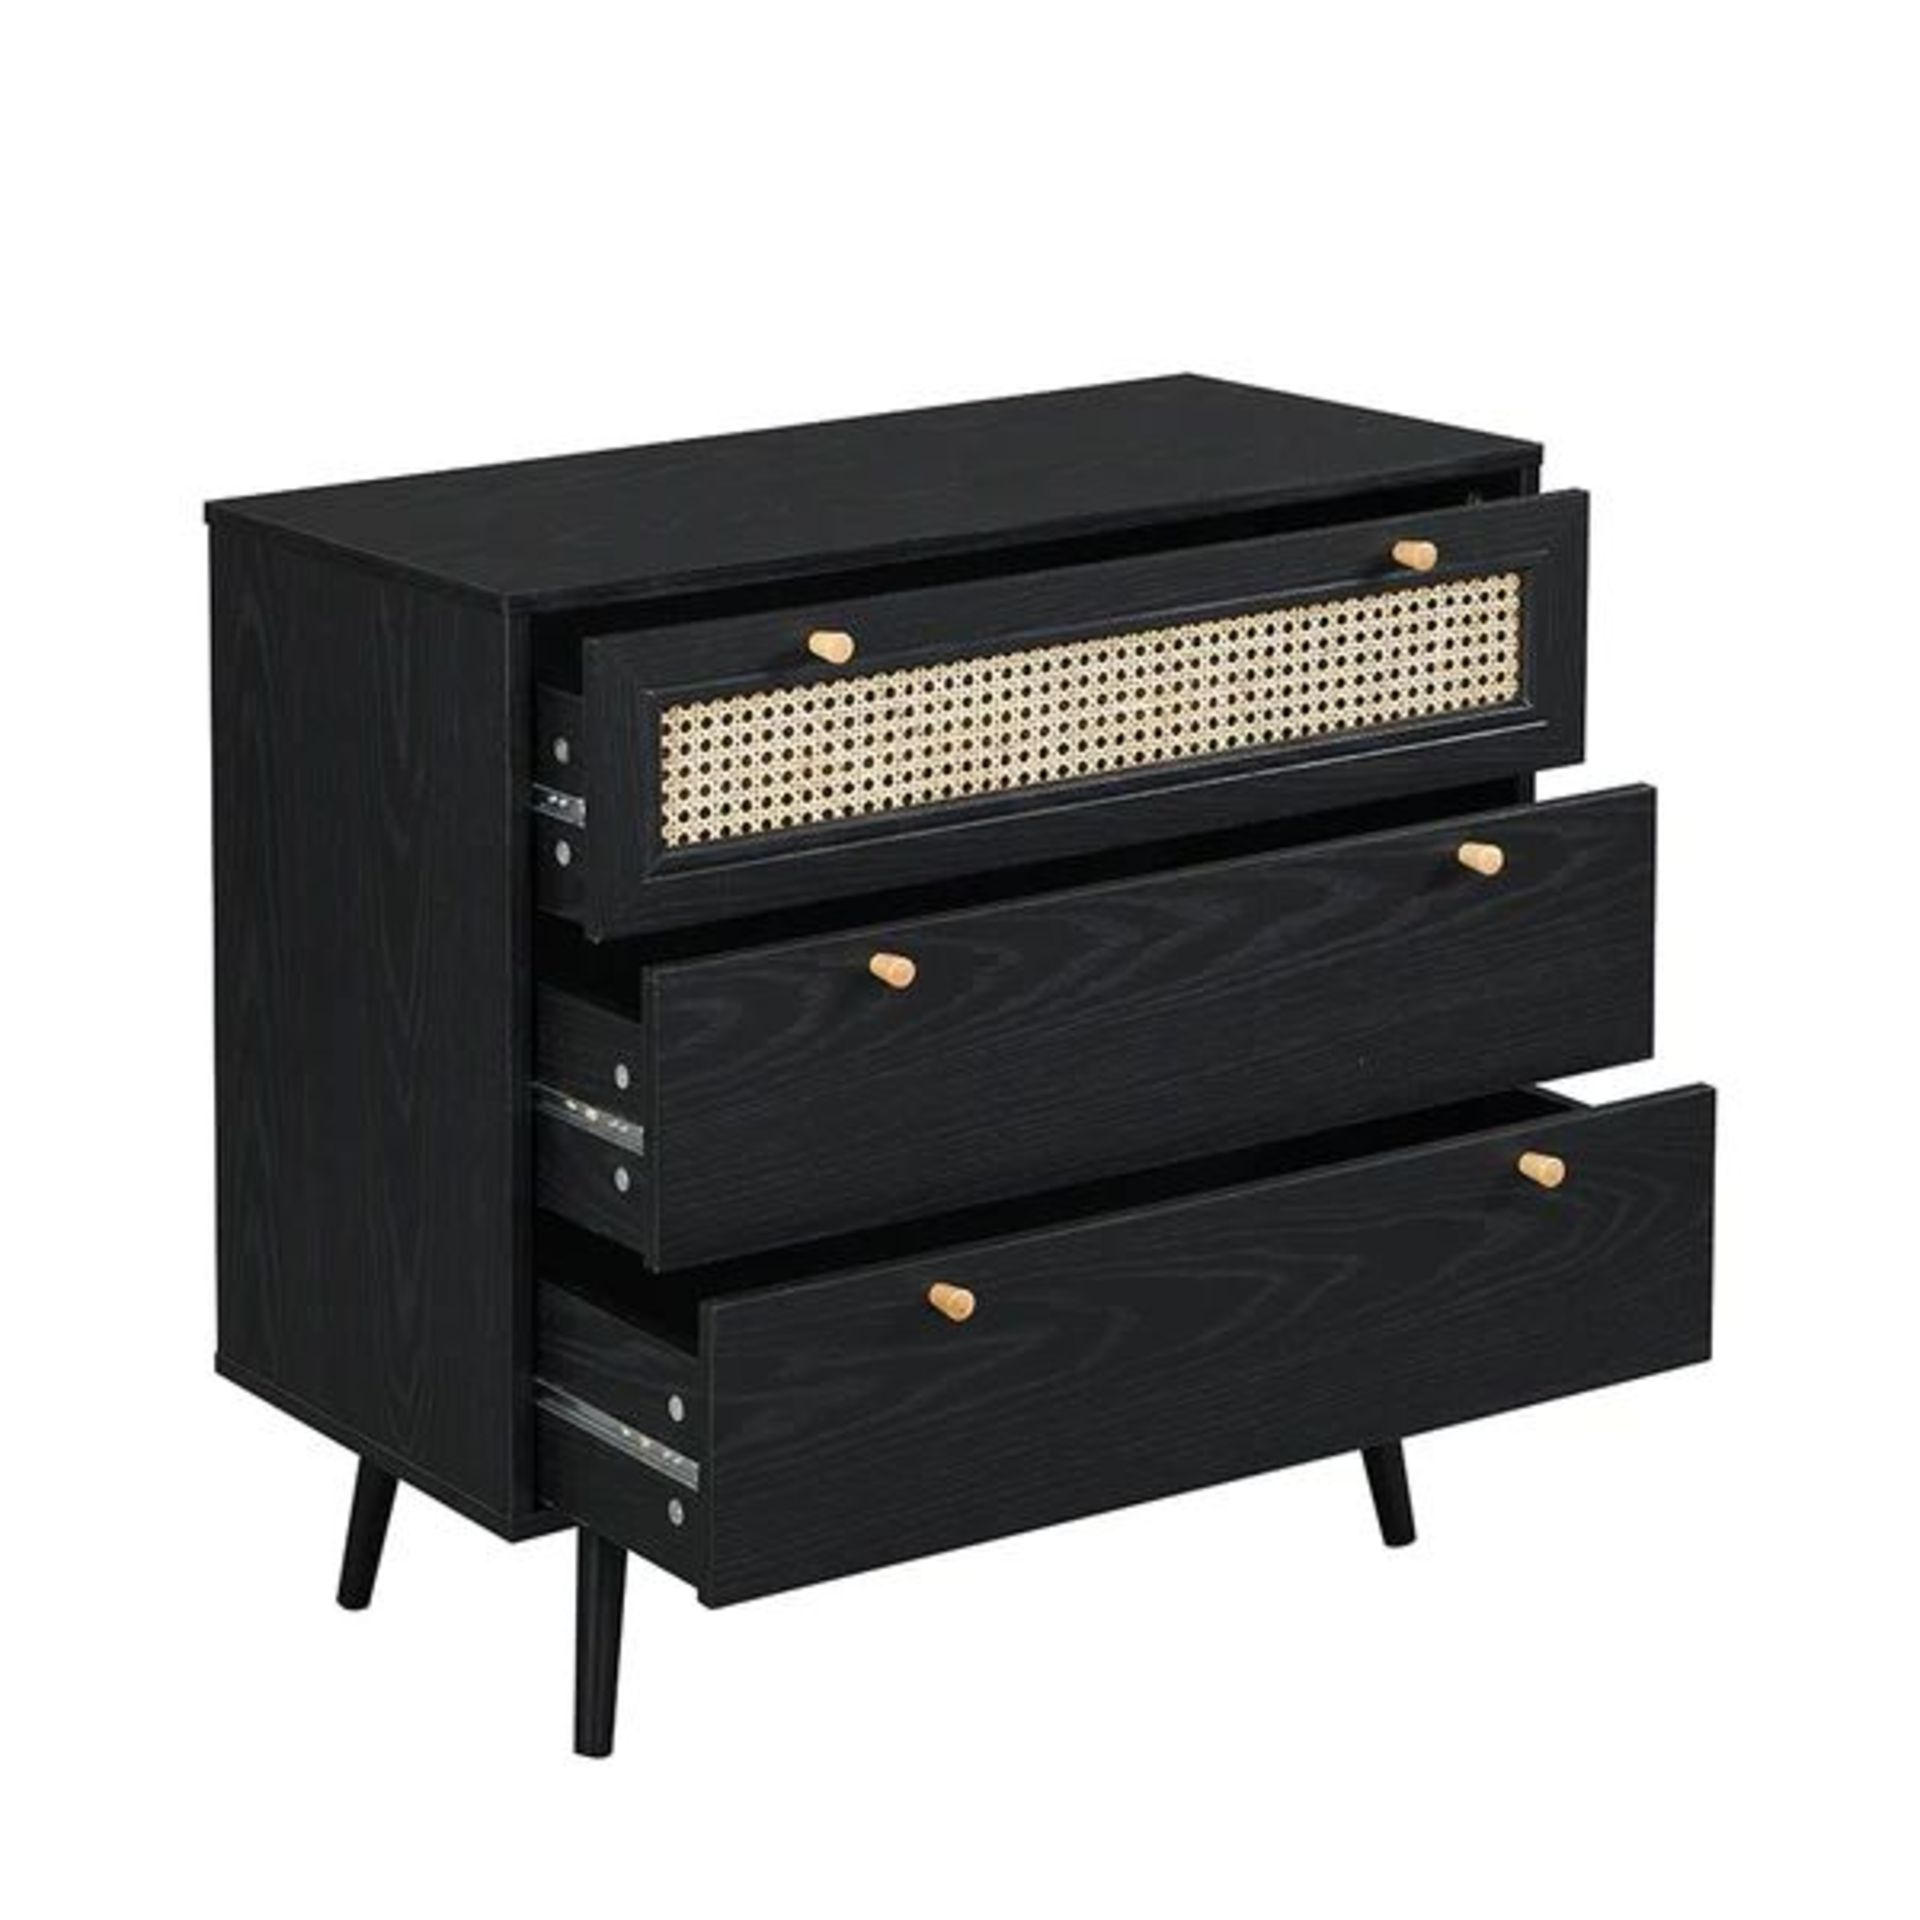 Anya Woven Rattan Chest of 3 Drawer in Black Colour. - ER30. RRP £199.99. Our Anya drawer chest is - Bild 2 aus 2